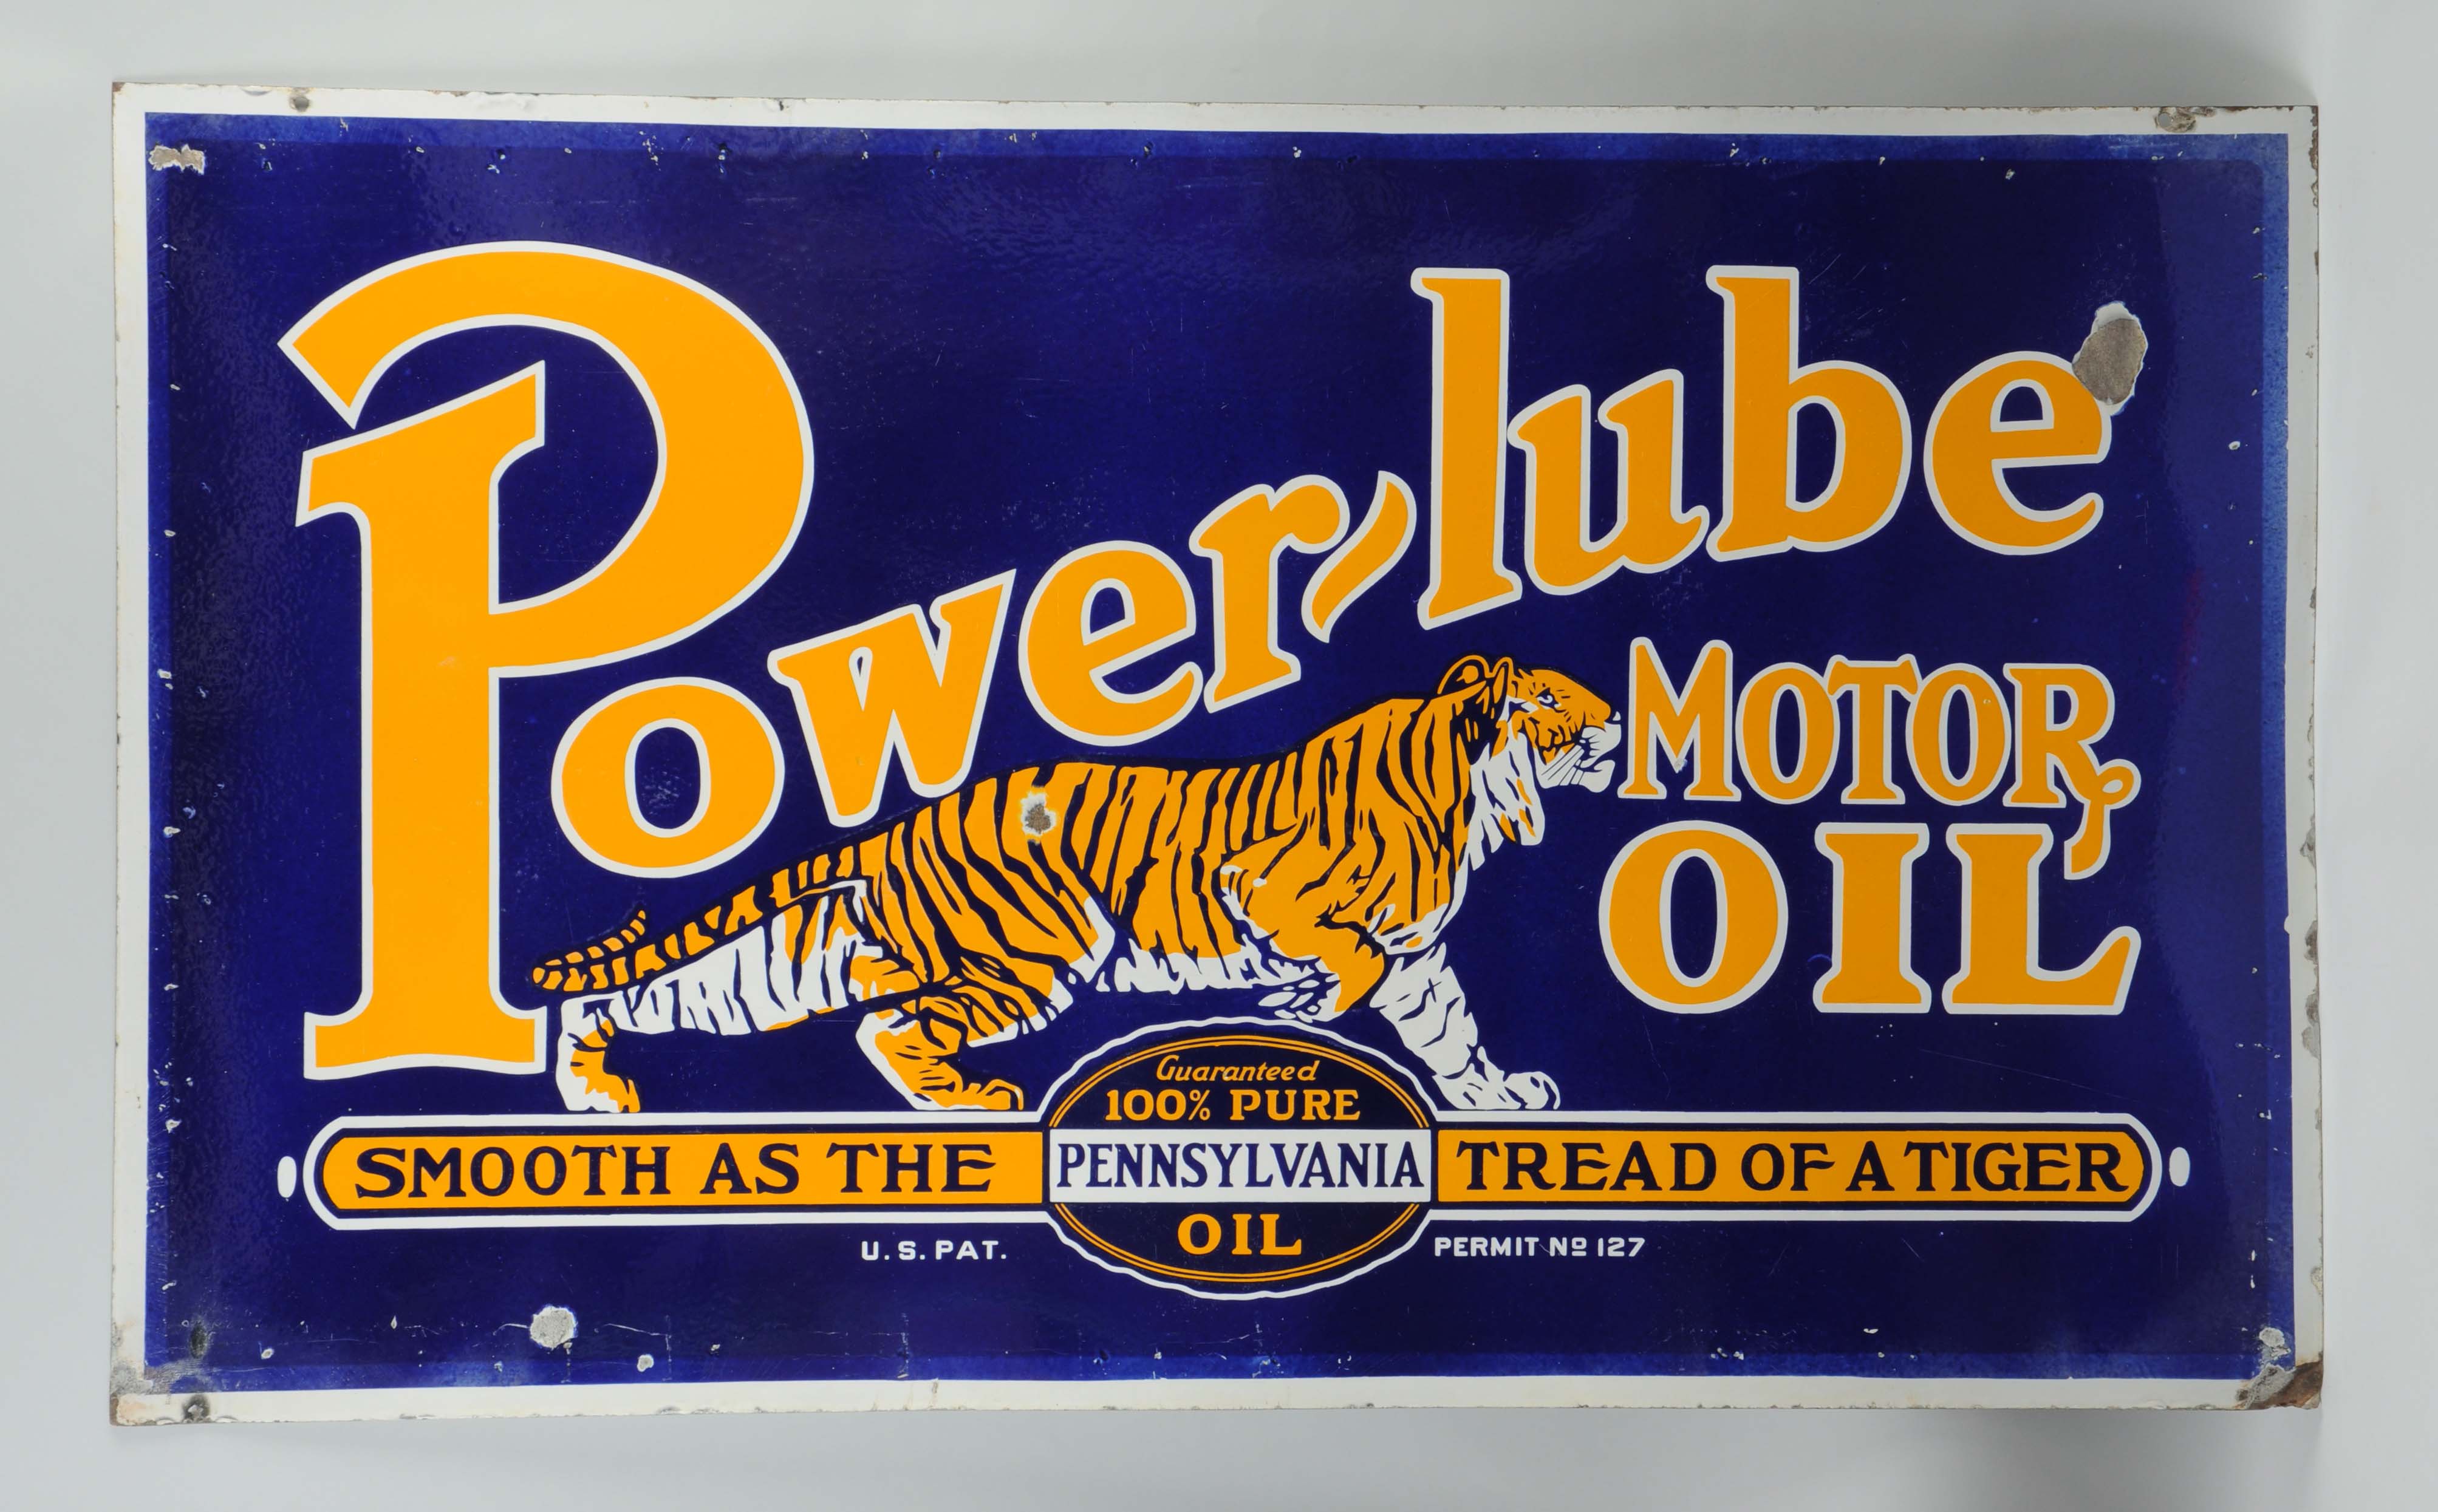 Lot #137,  Power-Lube Motor Oil Sign, estimated at $10,000-$20,000.